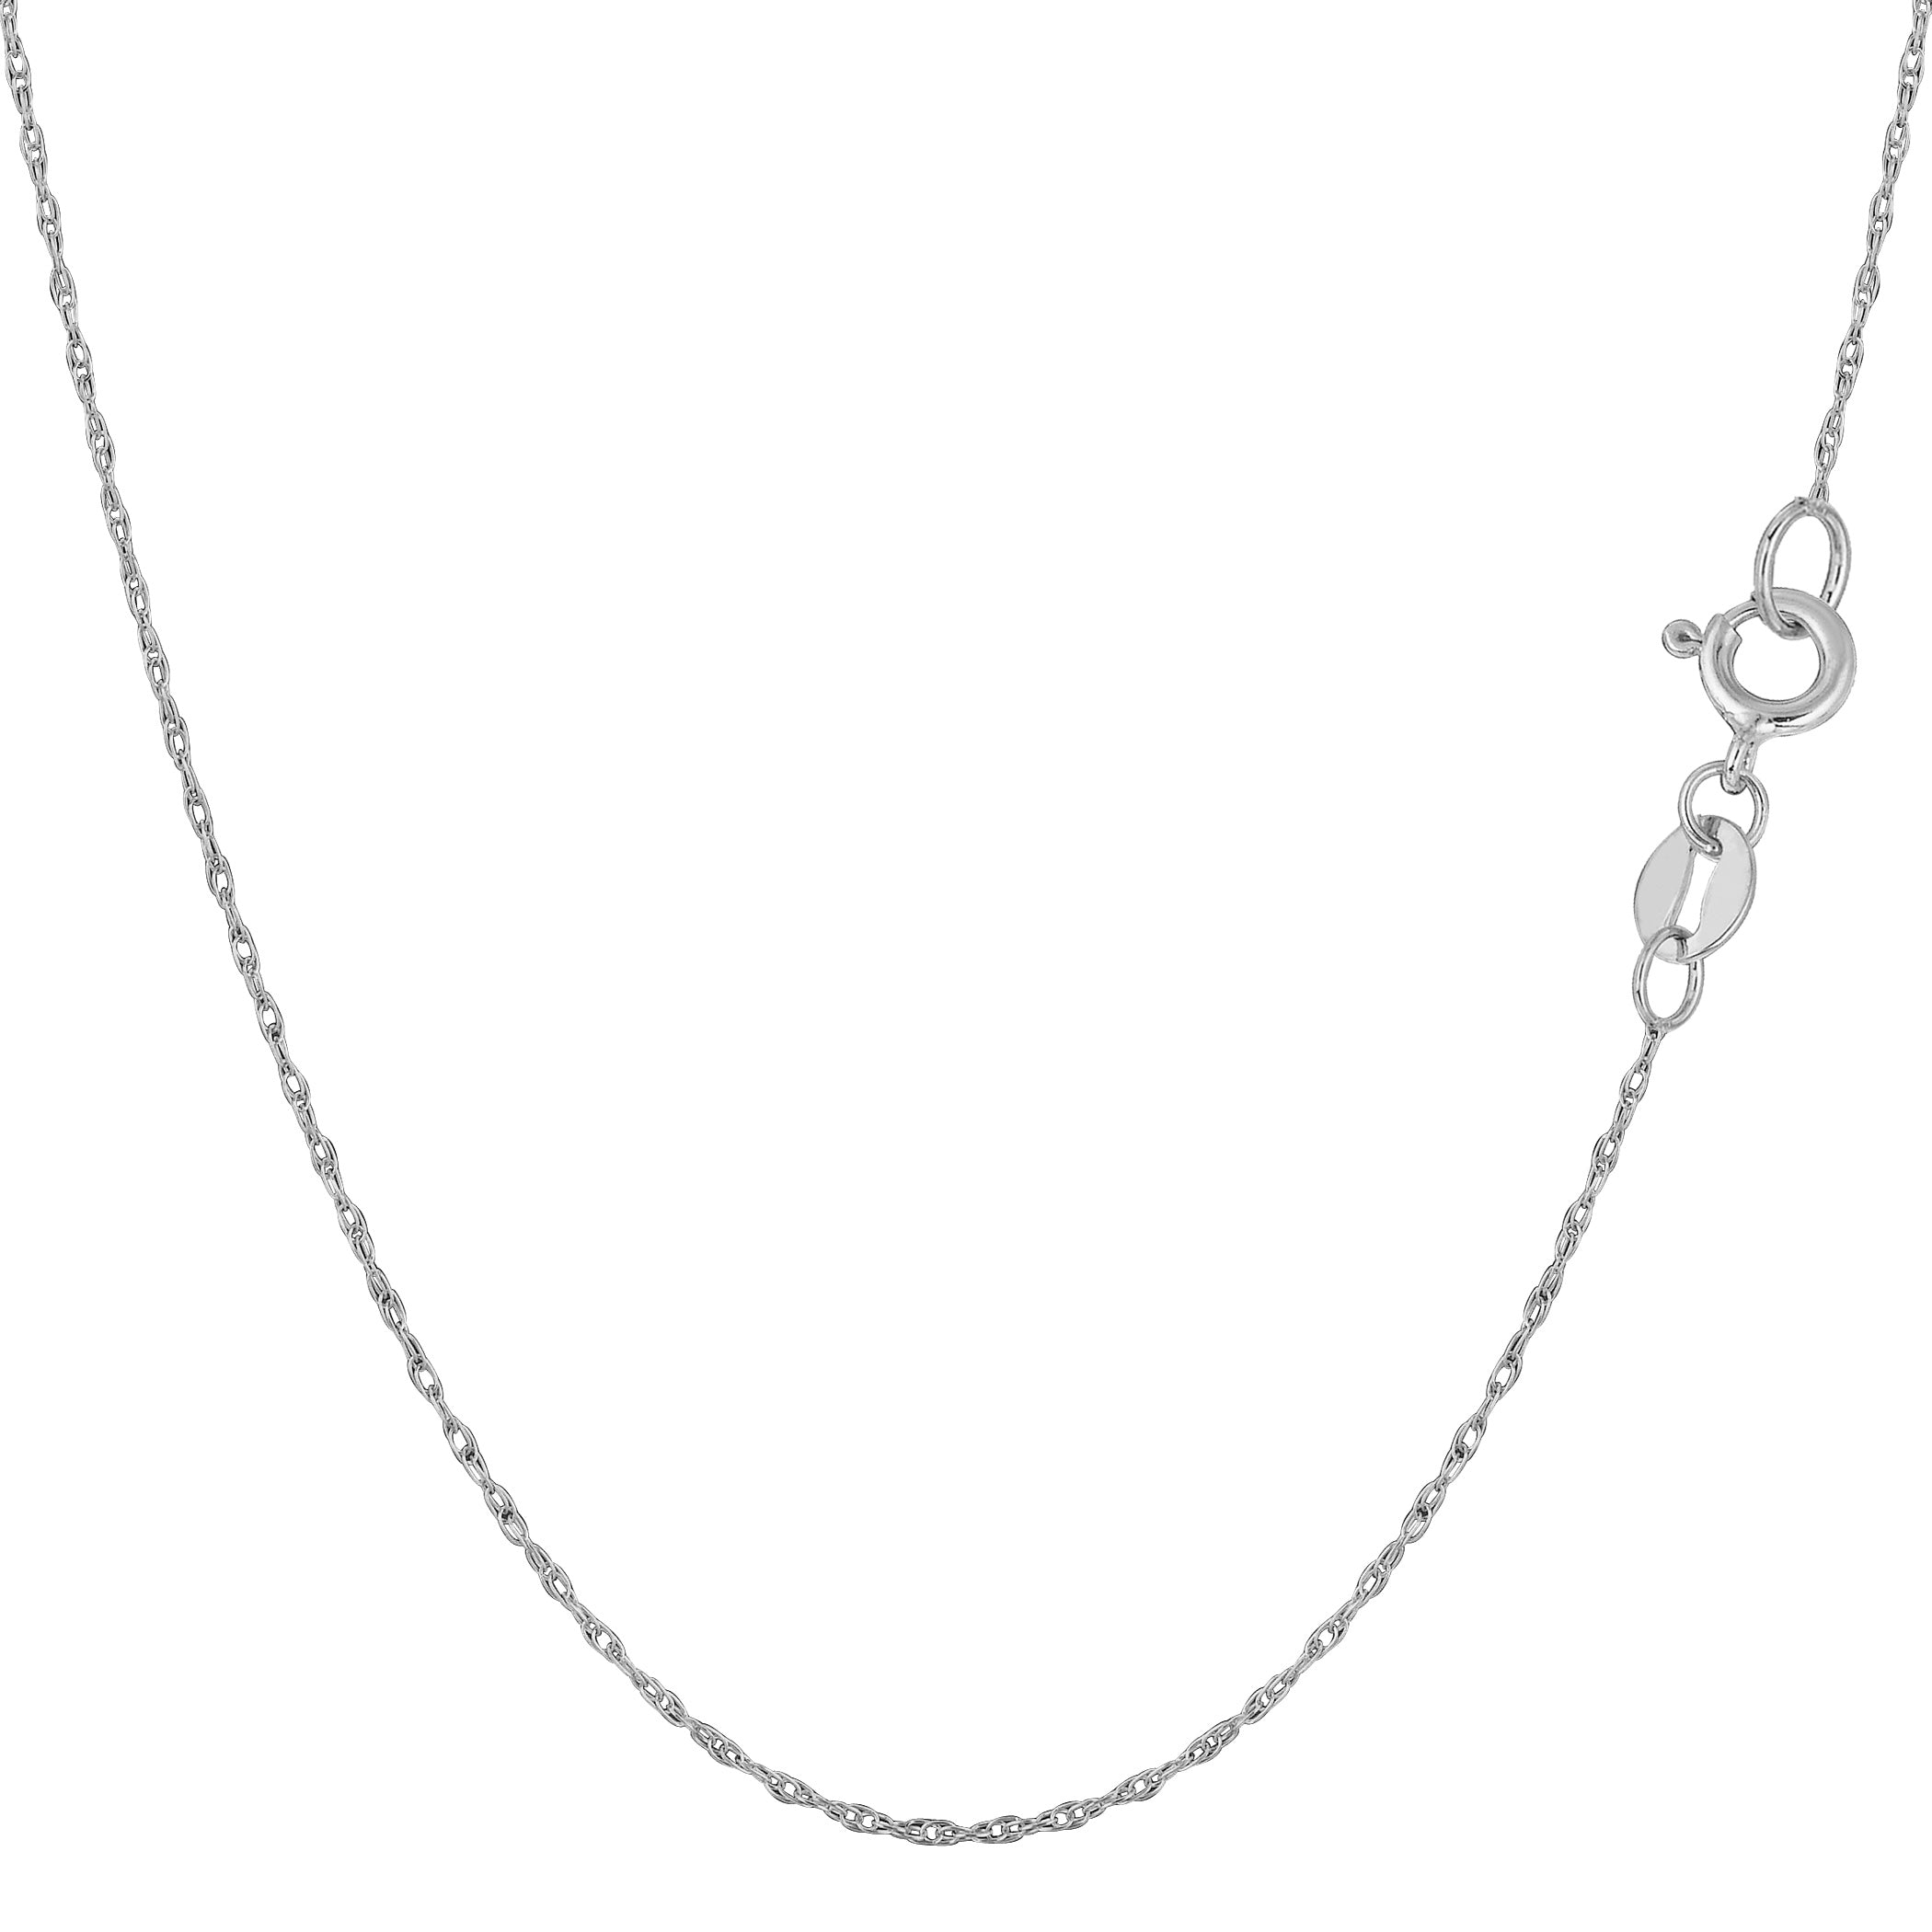 10k White Gold Rope Chain Necklace, 0.5mm